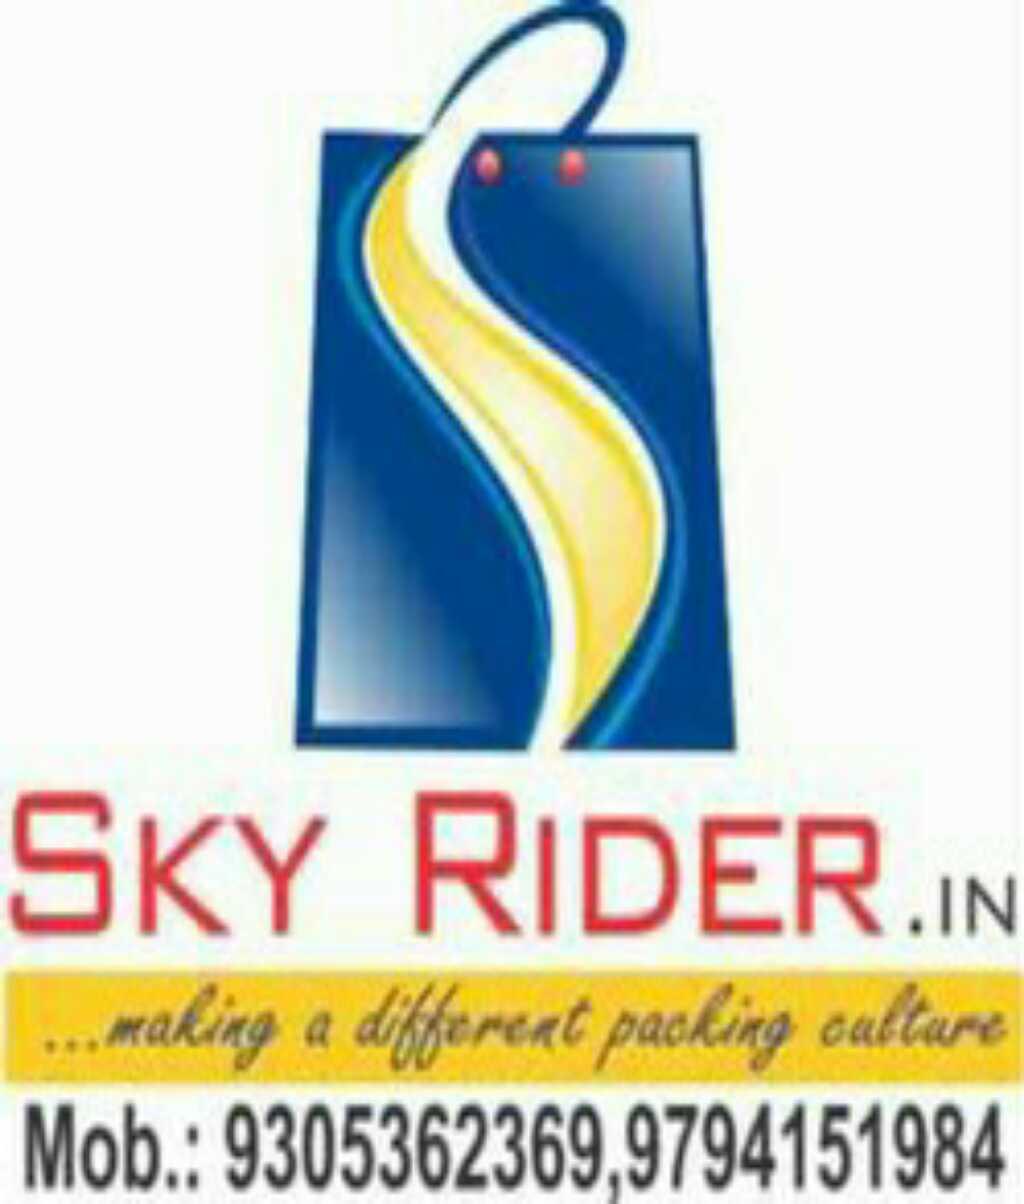 Sky Rider Business Solution